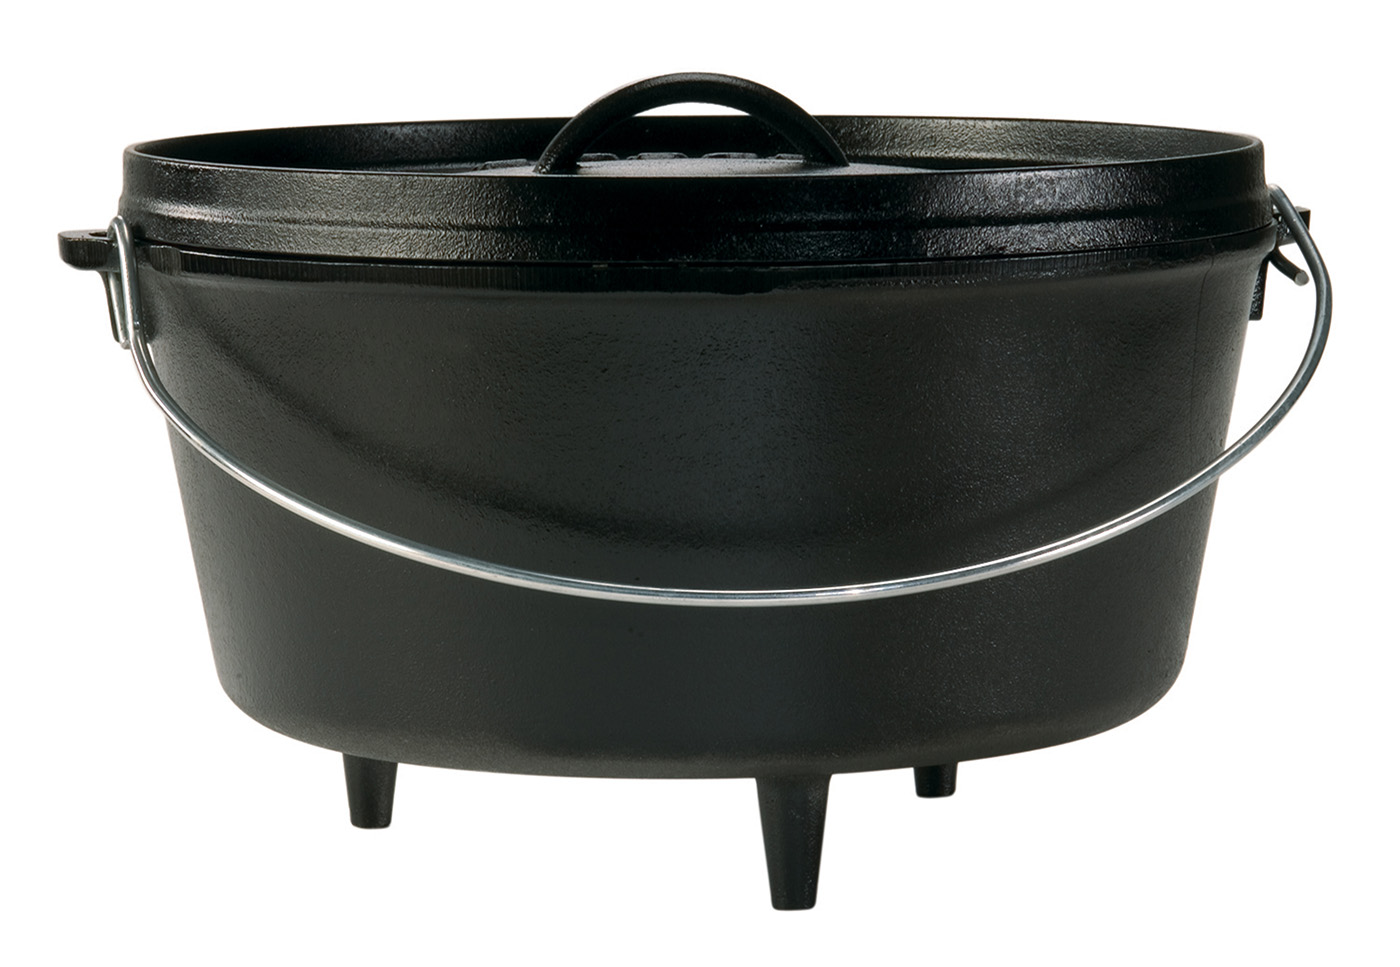 dating lodge cast iron dutch oven